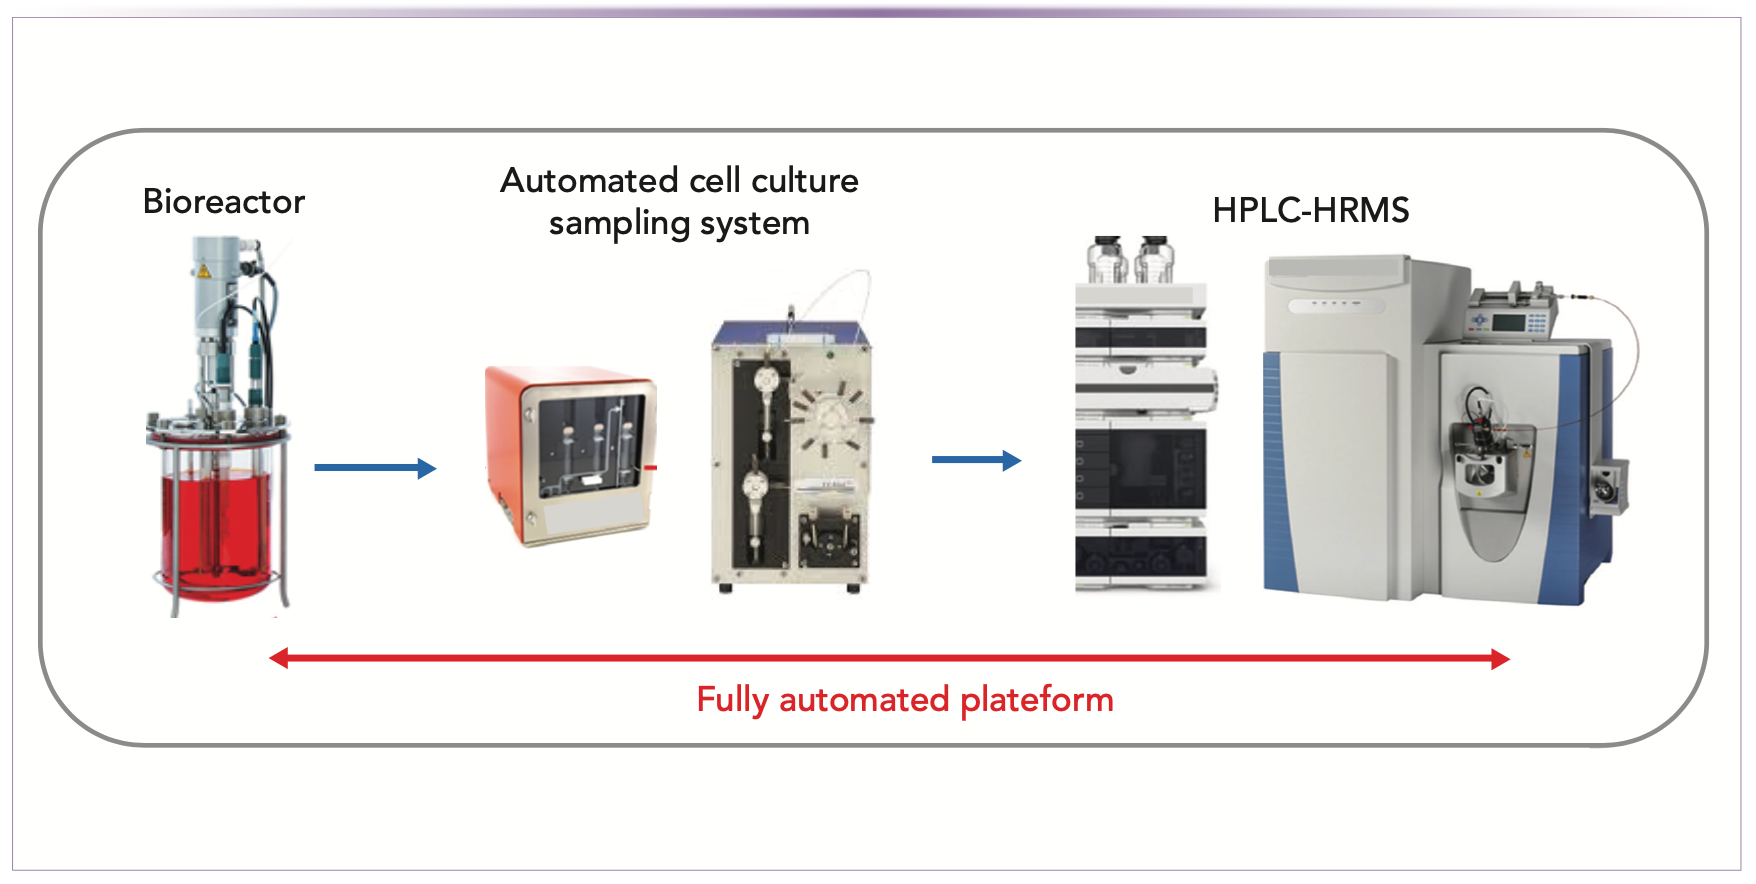 FIGURE 1: Schematic representation of the fully automated HPLC–HRMS platform for the real-time monitoring of antibody QAs for cell culture processes in bioreactors. The system is composed of online sampling liquid from the bioreactor, chromatographic purification of protein from the sampled liquid (thereby providing purified protein), and analysis of the purified protein by HPLC–HRMS.